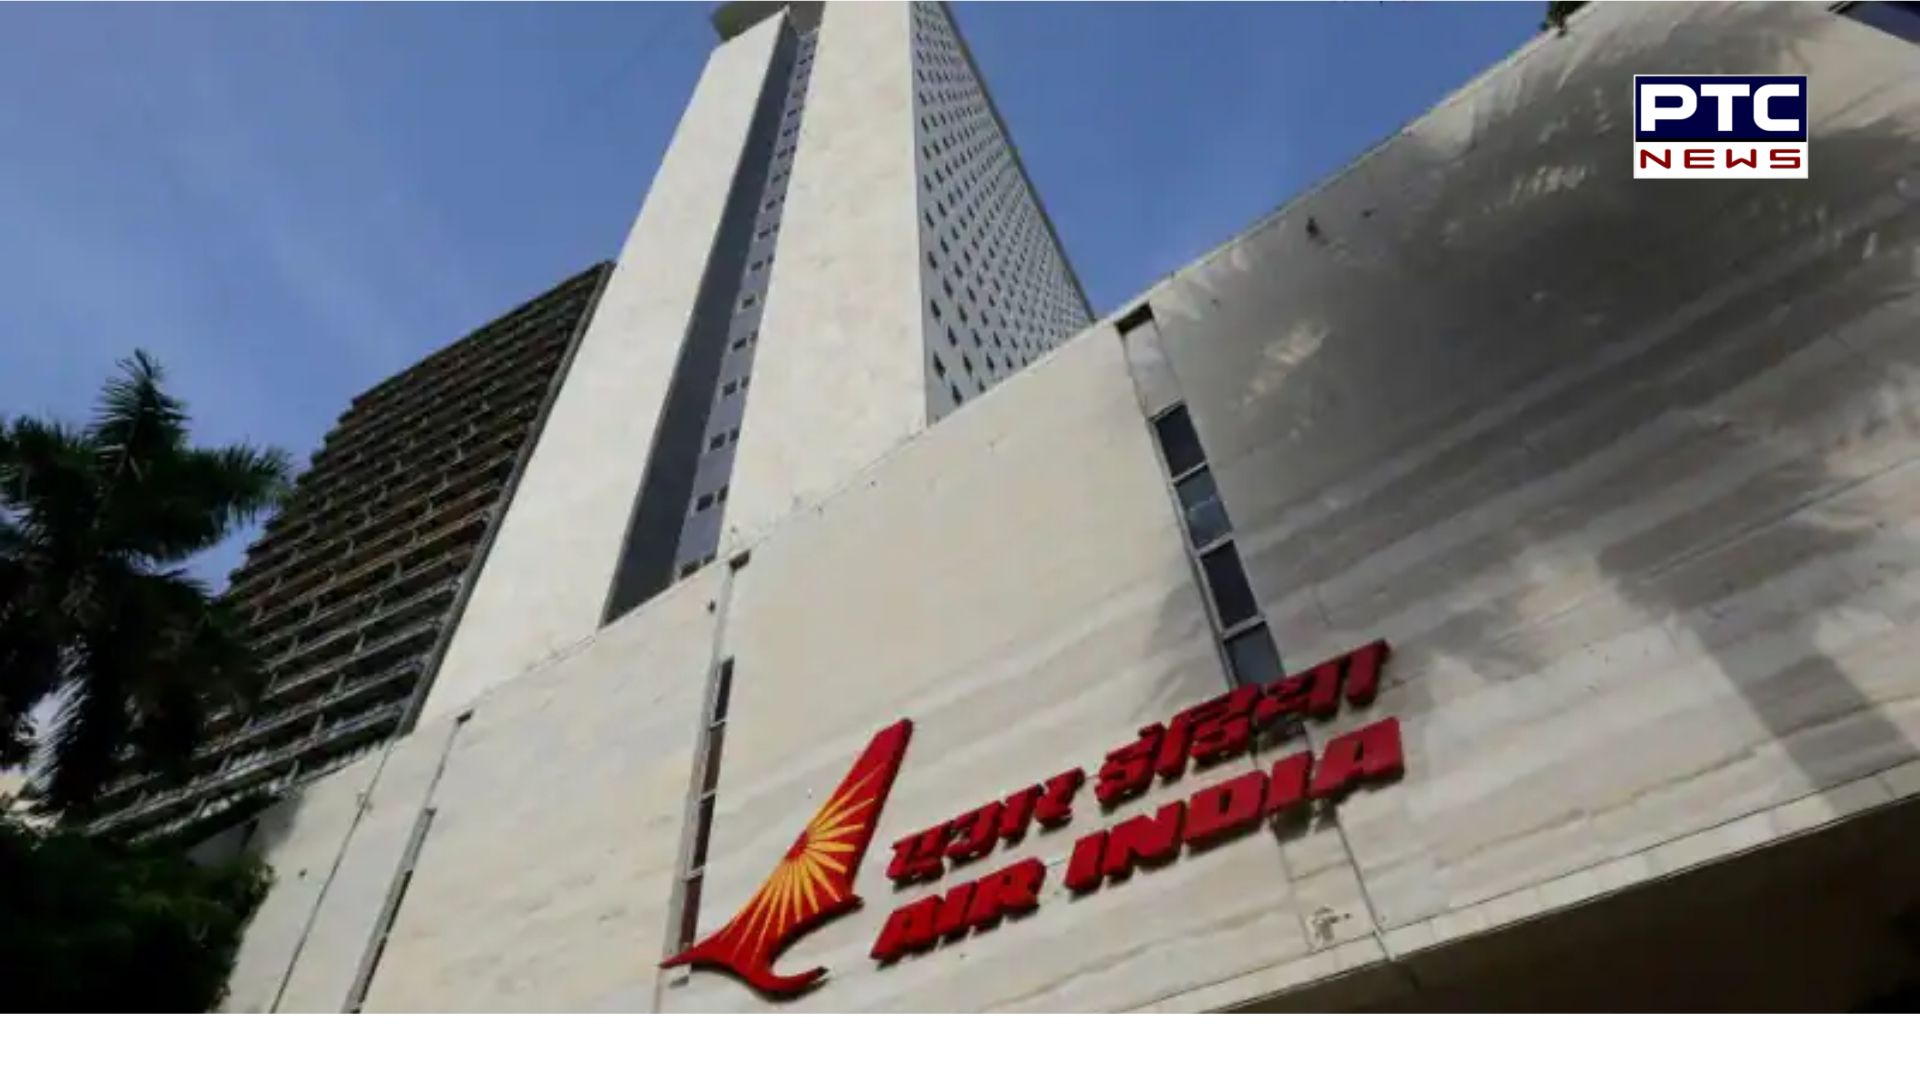 Maharashtra Govt gets iconic Air India building for a whopping Rs 1,601 crore